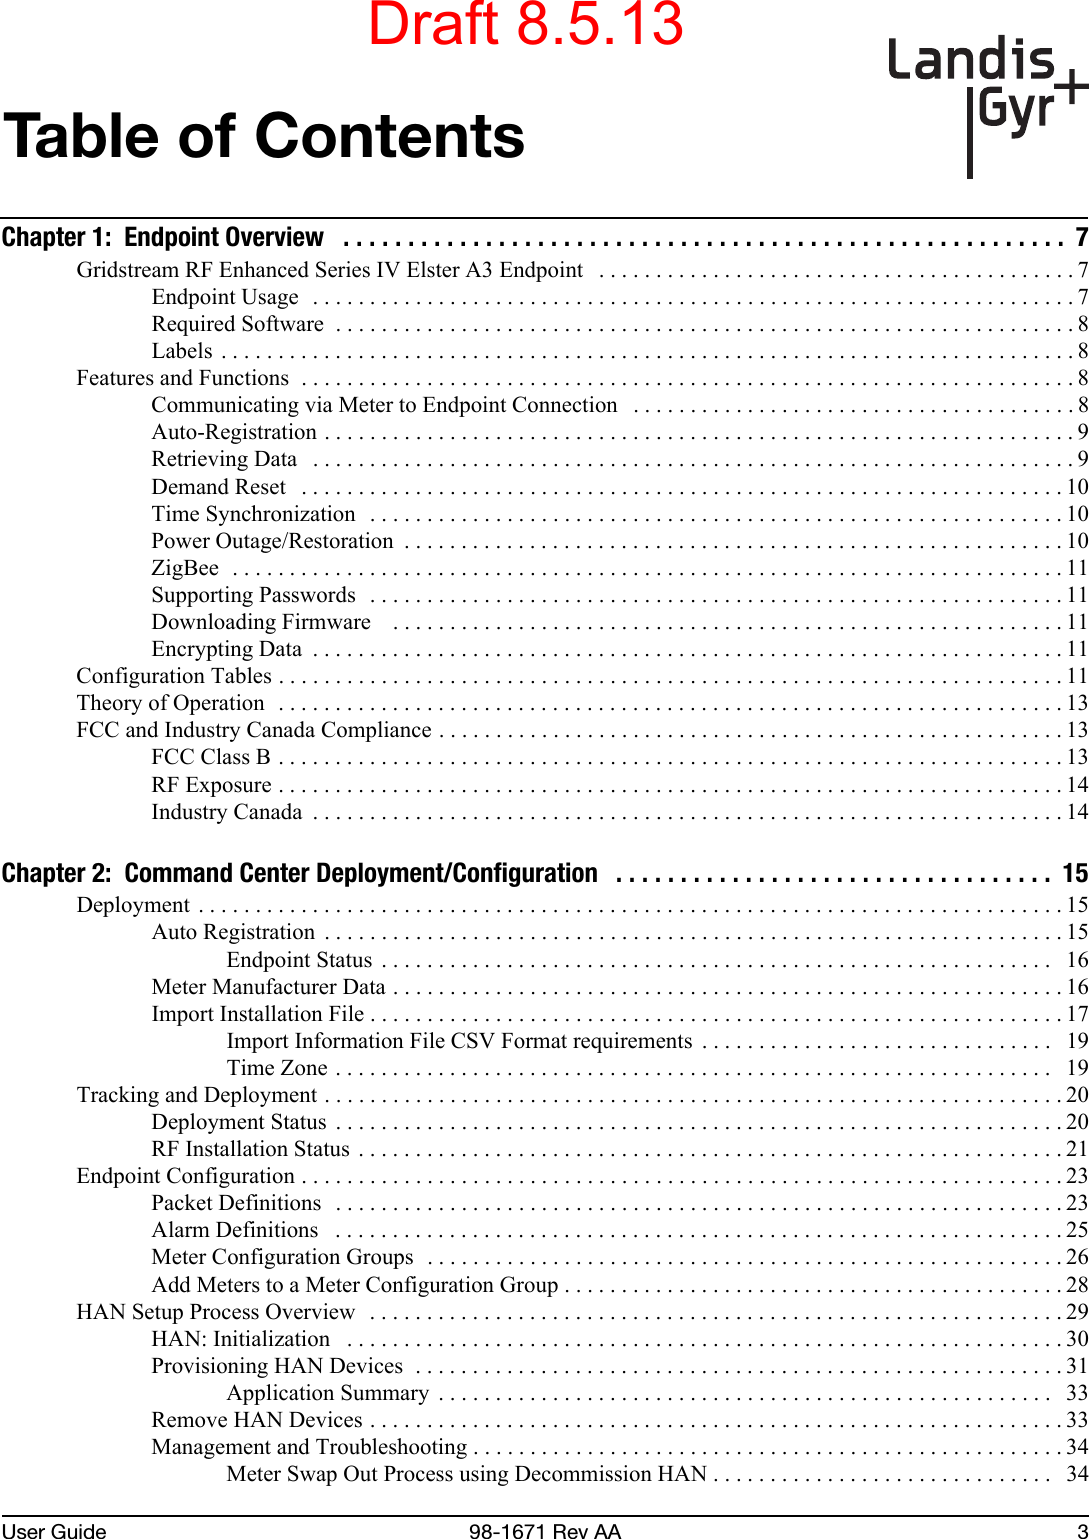 User Guide 98-1671 Rev AA 3Table of ContentsChapter 1:  Endpoint Overview   . . . . . . . . . . . . . . . . . . . . . . . . . . . . . . . . . . . . . . . . . . . . . . . . . . . . . . . .  7Gridstream RF Enhanced Series IV Elster A3 Endpoint   . . . . . . . . . . . . . . . . . . . . . . . . . . . . . . . . . . . . . . . . . . 7Endpoint Usage   . . . . . . . . . . . . . . . . . . . . . . . . . . . . . . . . . . . . . . . . . . . . . . . . . . . . . . . . . . . . . . . . . . . 7Required Software  . . . . . . . . . . . . . . . . . . . . . . . . . . . . . . . . . . . . . . . . . . . . . . . . . . . . . . . . . . . . . . . . . 8Labels  . . . . . . . . . . . . . . . . . . . . . . . . . . . . . . . . . . . . . . . . . . . . . . . . . . . . . . . . . . . . . . . . . . . . . . . . . . . 8Features and Functions  . . . . . . . . . . . . . . . . . . . . . . . . . . . . . . . . . . . . . . . . . . . . . . . . . . . . . . . . . . . . . . . . . . . . 8Communicating via Meter to Endpoint Connection   . . . . . . . . . . . . . . . . . . . . . . . . . . . . . . . . . . . . . . . 8Auto-Registration . . . . . . . . . . . . . . . . . . . . . . . . . . . . . . . . . . . . . . . . . . . . . . . . . . . . . . . . . . . . . . . . . . 9Retrieving Data   . . . . . . . . . . . . . . . . . . . . . . . . . . . . . . . . . . . . . . . . . . . . . . . . . . . . . . . . . . . . . . . . . . . 9Demand Reset   . . . . . . . . . . . . . . . . . . . . . . . . . . . . . . . . . . . . . . . . . . . . . . . . . . . . . . . . . . . . . . . . . . . 10Time Synchronization  . . . . . . . . . . . . . . . . . . . . . . . . . . . . . . . . . . . . . . . . . . . . . . . . . . . . . . . . . . . . . 10Power Outage/Restoration  . . . . . . . . . . . . . . . . . . . . . . . . . . . . . . . . . . . . . . . . . . . . . . . . . . . . . . . . . . 10ZigBee  . . . . . . . . . . . . . . . . . . . . . . . . . . . . . . . . . . . . . . . . . . . . . . . . . . . . . . . . . . . . . . . . . . . . . . . . . 11Supporting Passwords  . . . . . . . . . . . . . . . . . . . . . . . . . . . . . . . . . . . . . . . . . . . . . . . . . . . . . . . . . . . . . 11Downloading Firmware    . . . . . . . . . . . . . . . . . . . . . . . . . . . . . . . . . . . . . . . . . . . . . . . . . . . . . . . . . . . 11Encrypting Data  . . . . . . . . . . . . . . . . . . . . . . . . . . . . . . . . . . . . . . . . . . . . . . . . . . . . . . . . . . . . . . . . . . 11Configuration Tables . . . . . . . . . . . . . . . . . . . . . . . . . . . . . . . . . . . . . . . . . . . . . . . . . . . . . . . . . . . . . . . . . . . . . 11Theory of Operation  . . . . . . . . . . . . . . . . . . . . . . . . . . . . . . . . . . . . . . . . . . . . . . . . . . . . . . . . . . . . . . . . . . . . . 13FCC and Industry Canada Compliance . . . . . . . . . . . . . . . . . . . . . . . . . . . . . . . . . . . . . . . . . . . . . . . . . . . . . . . 13FCC Class B . . . . . . . . . . . . . . . . . . . . . . . . . . . . . . . . . . . . . . . . . . . . . . . . . . . . . . . . . . . . . . . . . . . . . 13RF Exposure . . . . . . . . . . . . . . . . . . . . . . . . . . . . . . . . . . . . . . . . . . . . . . . . . . . . . . . . . . . . . . . . . . . . . 14Industry Canada  . . . . . . . . . . . . . . . . . . . . . . . . . . . . . . . . . . . . . . . . . . . . . . . . . . . . . . . . . . . . . . . . . . 14Chapter 2:  Command Center Deployment/Configuration   . . . . . . . . . . . . . . . . . . . . . . . . . . . . . . . . . .  15Deployment  . . . . . . . . . . . . . . . . . . . . . . . . . . . . . . . . . . . . . . . . . . . . . . . . . . . . . . . . . . . . . . . . . . . . . . . . . . . . 15Auto Registration  . . . . . . . . . . . . . . . . . . . . . . . . . . . . . . . . . . . . . . . . . . . . . . . . . . . . . . . . . . . . . . . . . 15Endpoint Status  . . . . . . . . . . . . . . . . . . . . . . . . . . . . . . . . . . . . . . . . . . . . . . . . . . . . . . . . . . .   16Meter Manufacturer Data . . . . . . . . . . . . . . . . . . . . . . . . . . . . . . . . . . . . . . . . . . . . . . . . . . . . . . . . . . . 16Import Installation File . . . . . . . . . . . . . . . . . . . . . . . . . . . . . . . . . . . . . . . . . . . . . . . . . . . . . . . . . . . . . 17Import Information File CSV Format requirements  . . . . . . . . . . . . . . . . . . . . . . . . . . . . . . .   19Time Zone . . . . . . . . . . . . . . . . . . . . . . . . . . . . . . . . . . . . . . . . . . . . . . . . . . . . . . . . . . . . . . .   19Tracking and Deployment . . . . . . . . . . . . . . . . . . . . . . . . . . . . . . . . . . . . . . . . . . . . . . . . . . . . . . . . . . . . . . . . . 20Deployment Status  . . . . . . . . . . . . . . . . . . . . . . . . . . . . . . . . . . . . . . . . . . . . . . . . . . . . . . . . . . . . . . . . 20RF Installation Status . . . . . . . . . . . . . . . . . . . . . . . . . . . . . . . . . . . . . . . . . . . . . . . . . . . . . . . . . . . . . . 21Endpoint Configuration . . . . . . . . . . . . . . . . . . . . . . . . . . . . . . . . . . . . . . . . . . . . . . . . . . . . . . . . . . . . . . . . . . . 23Packet Definitions  . . . . . . . . . . . . . . . . . . . . . . . . . . . . . . . . . . . . . . . . . . . . . . . . . . . . . . . . . . . . . . . . 23Alarm Definitions   . . . . . . . . . . . . . . . . . . . . . . . . . . . . . . . . . . . . . . . . . . . . . . . . . . . . . . . . . . . . . . . . 25Meter Configuration Groups  . . . . . . . . . . . . . . . . . . . . . . . . . . . . . . . . . . . . . . . . . . . . . . . . . . . . . . . . 26Add Meters to a Meter Configuration Group . . . . . . . . . . . . . . . . . . . . . . . . . . . . . . . . . . . . . . . . . . . .28HAN Setup Process Overview   . . . . . . . . . . . . . . . . . . . . . . . . . . . . . . . . . . . . . . . . . . . . . . . . . . . . . . . . . . . . . 29HAN: Initialization   . . . . . . . . . . . . . . . . . . . . . . . . . . . . . . . . . . . . . . . . . . . . . . . . . . . . . . . . . . . . . . . 30Provisioning HAN Devices  . . . . . . . . . . . . . . . . . . . . . . . . . . . . . . . . . . . . . . . . . . . . . . . . . . . . . . . . . 31Application Summary  . . . . . . . . . . . . . . . . . . . . . . . . . . . . . . . . . . . . . . . . . . . . . . . . . . . . . .  33Remove HAN Devices . . . . . . . . . . . . . . . . . . . . . . . . . . . . . . . . . . . . . . . . . . . . . . . . . . . . . . . . . . . . . 33Management and Troubleshooting . . . . . . . . . . . . . . . . . . . . . . . . . . . . . . . . . . . . . . . . . . . . . . . . . . . . 34Meter Swap Out Process using Decommission HAN . . . . . . . . . . . . . . . . . . . . . . . . . . . . . .   34Draft 8.5.13